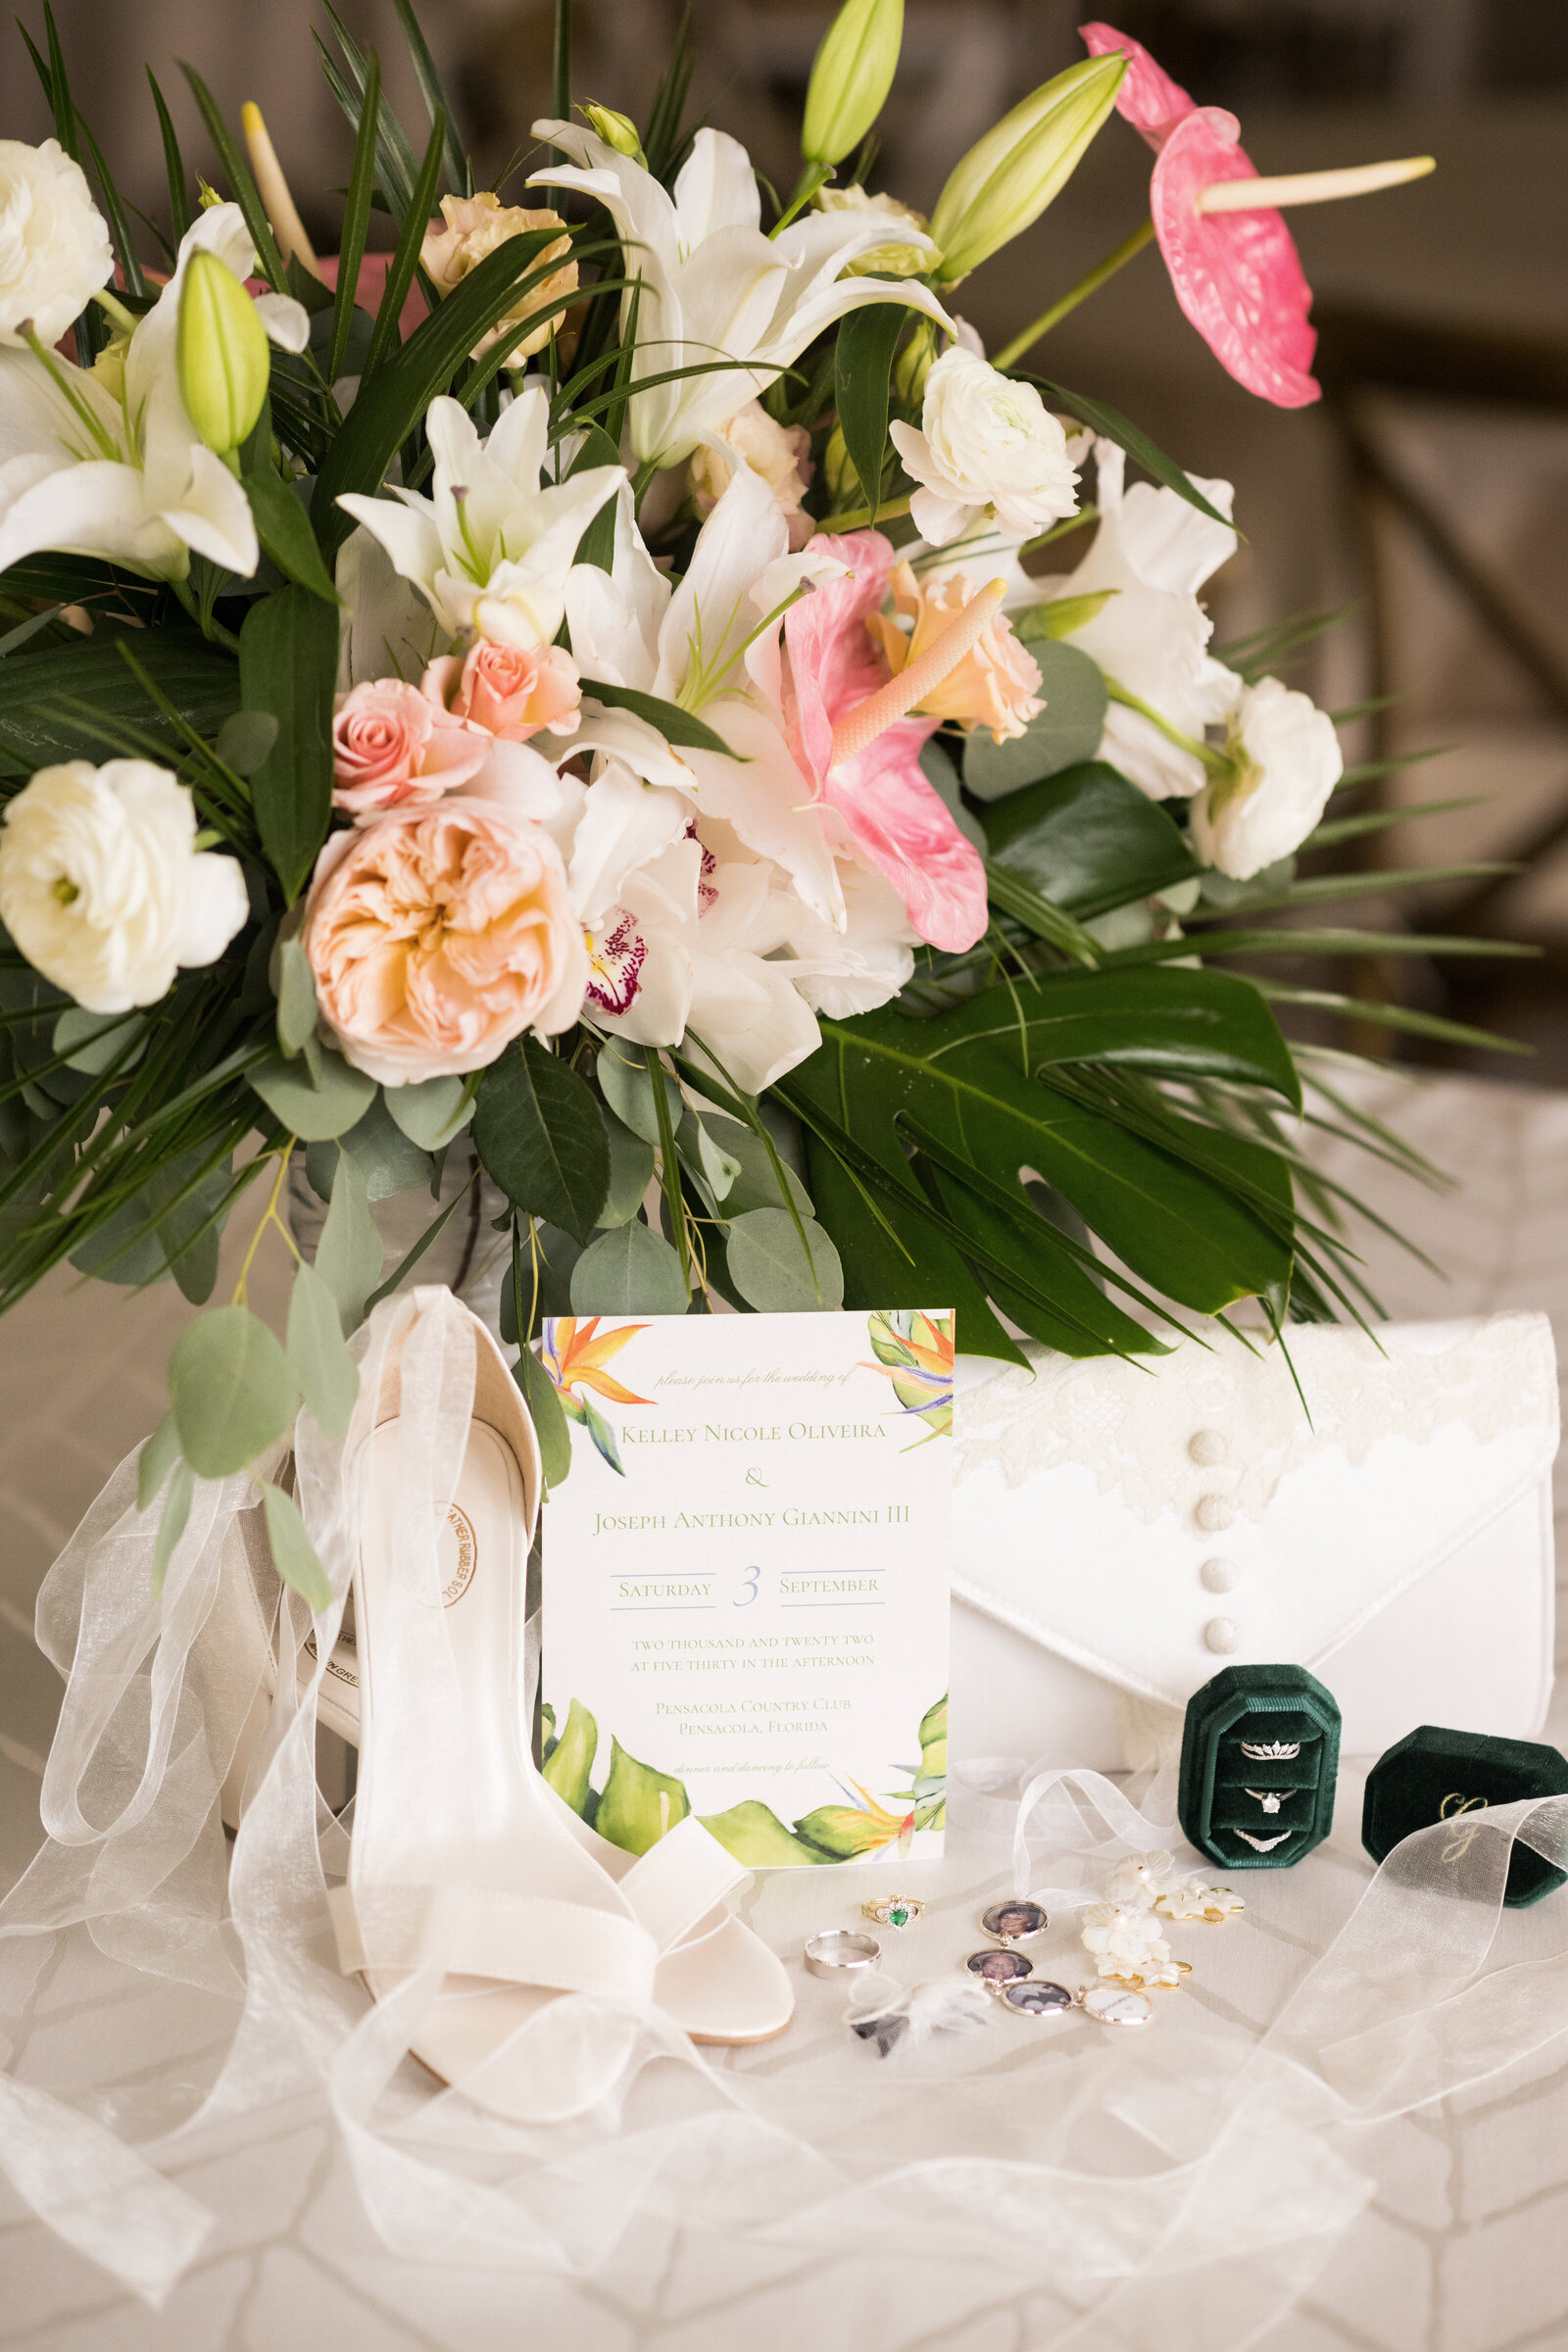 Details from a Pensacola wedding planner